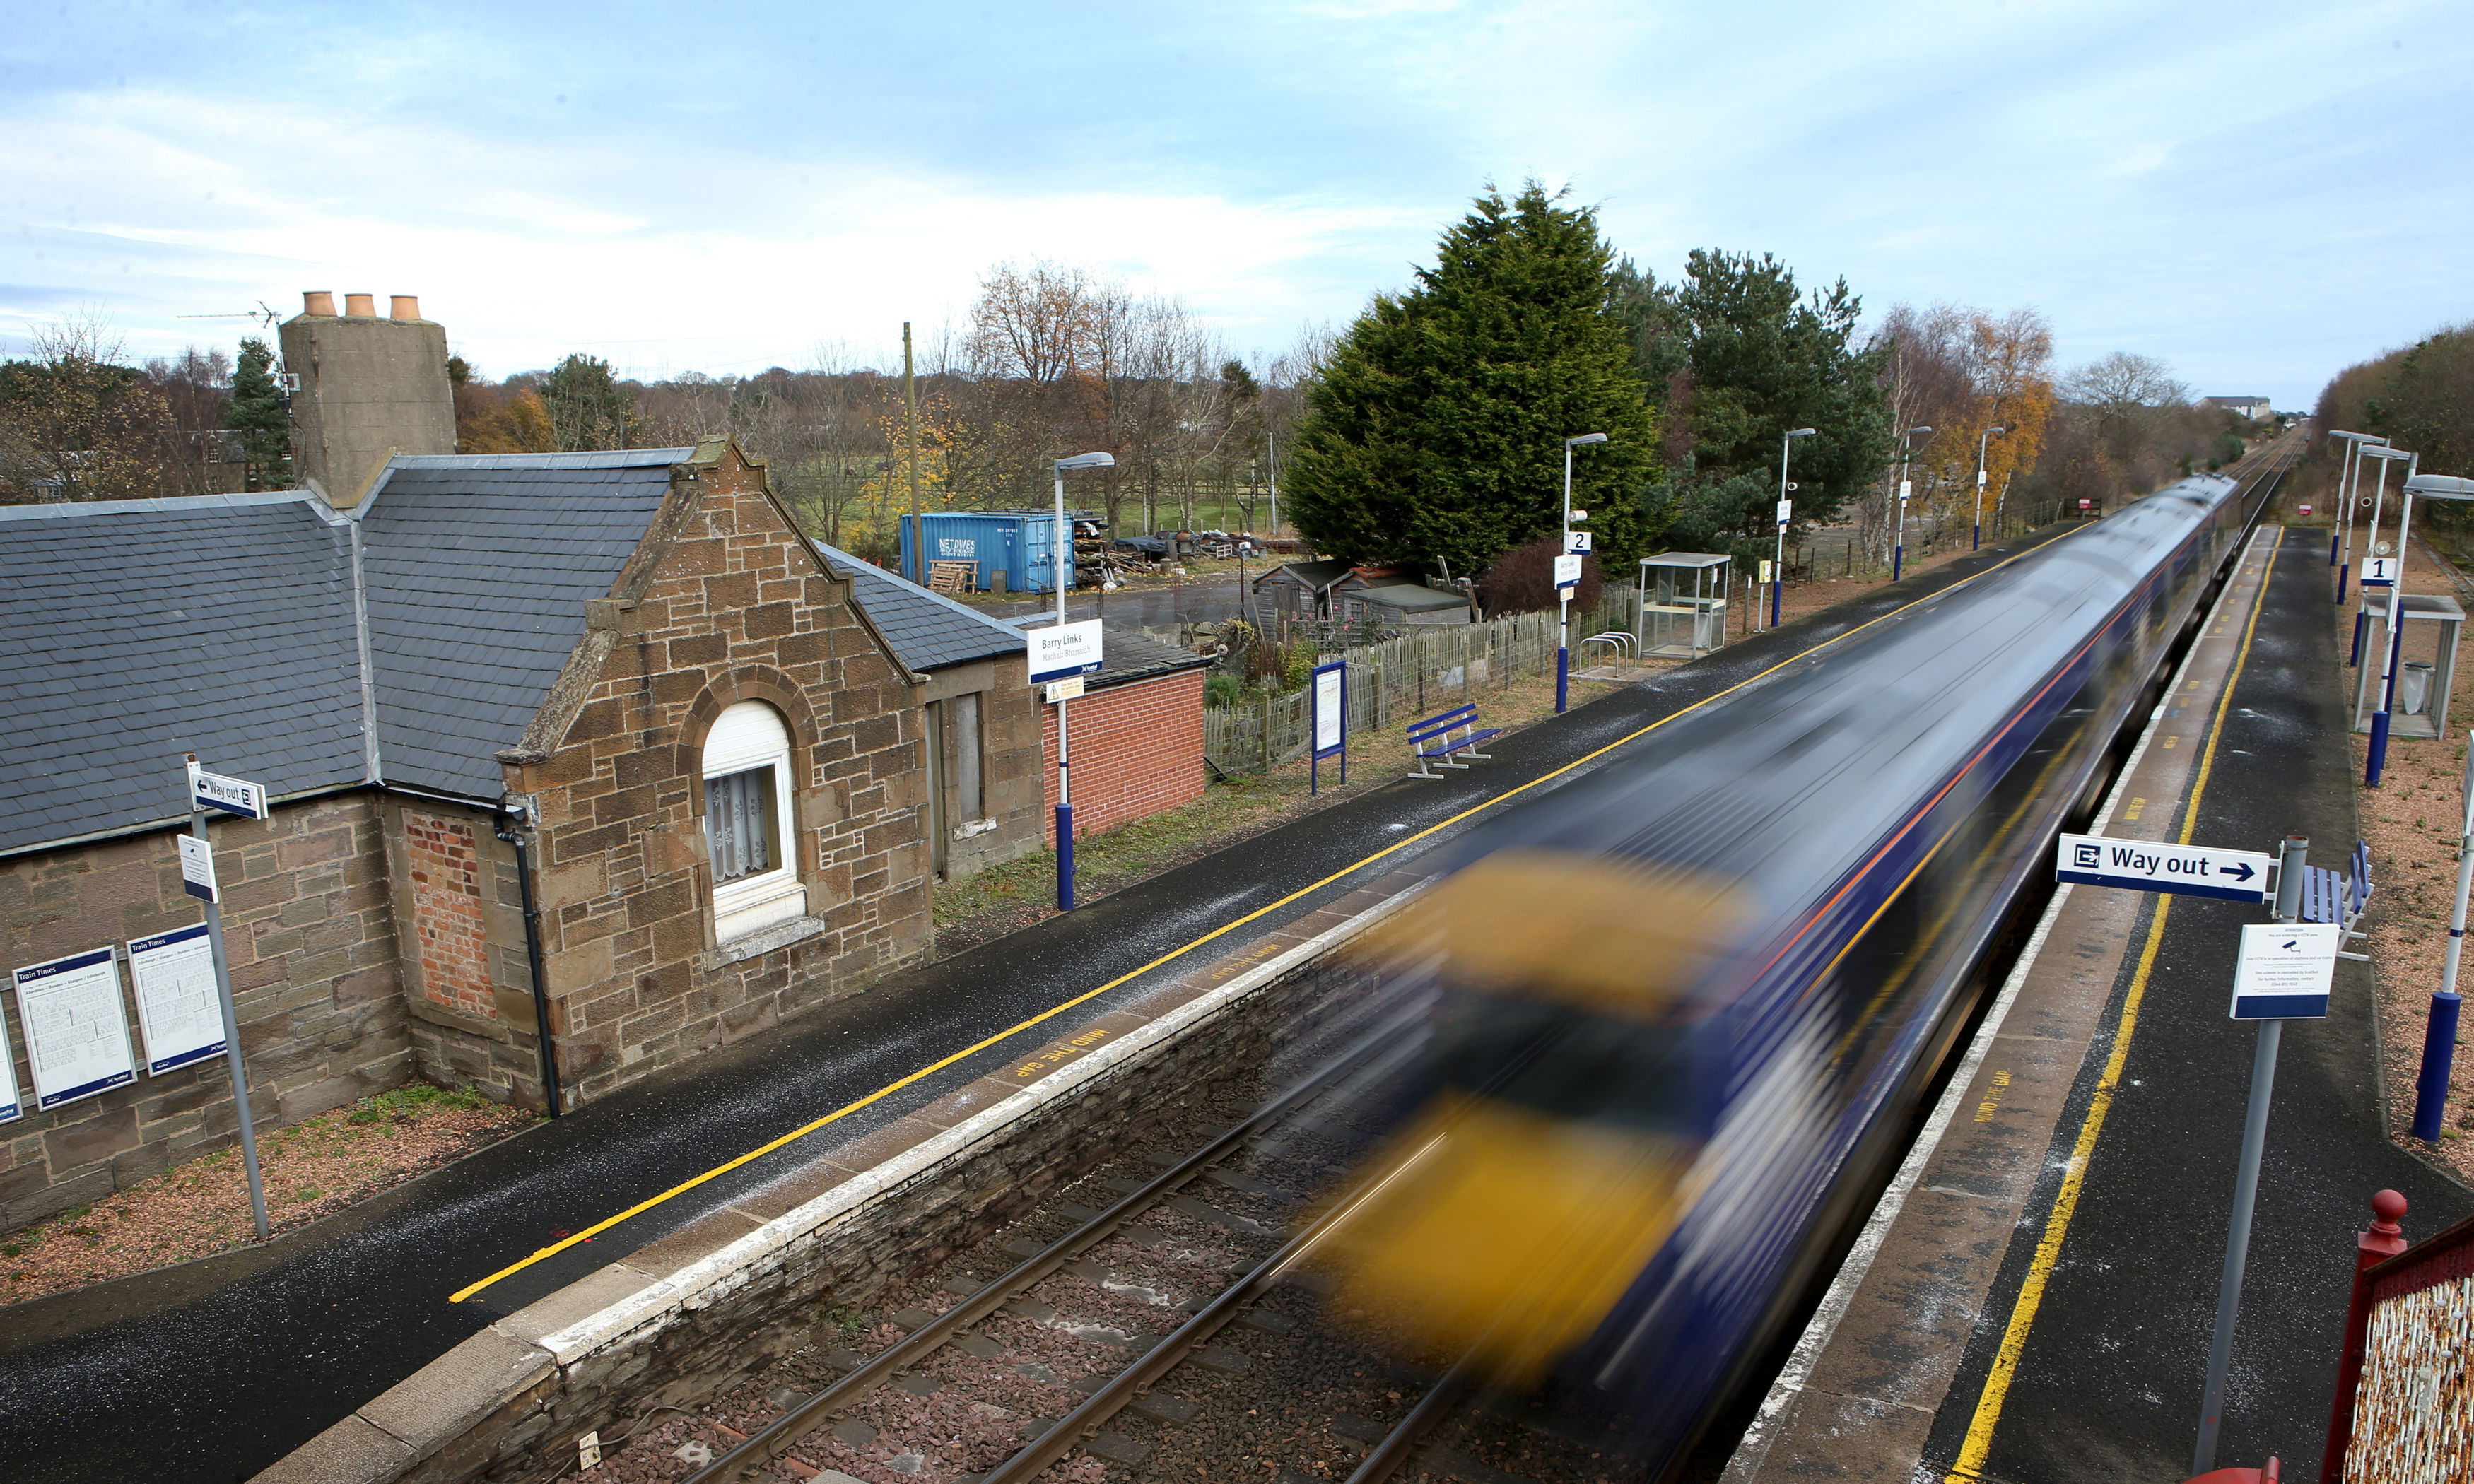 A train passes through Barry Links railway station near Carnoustie.